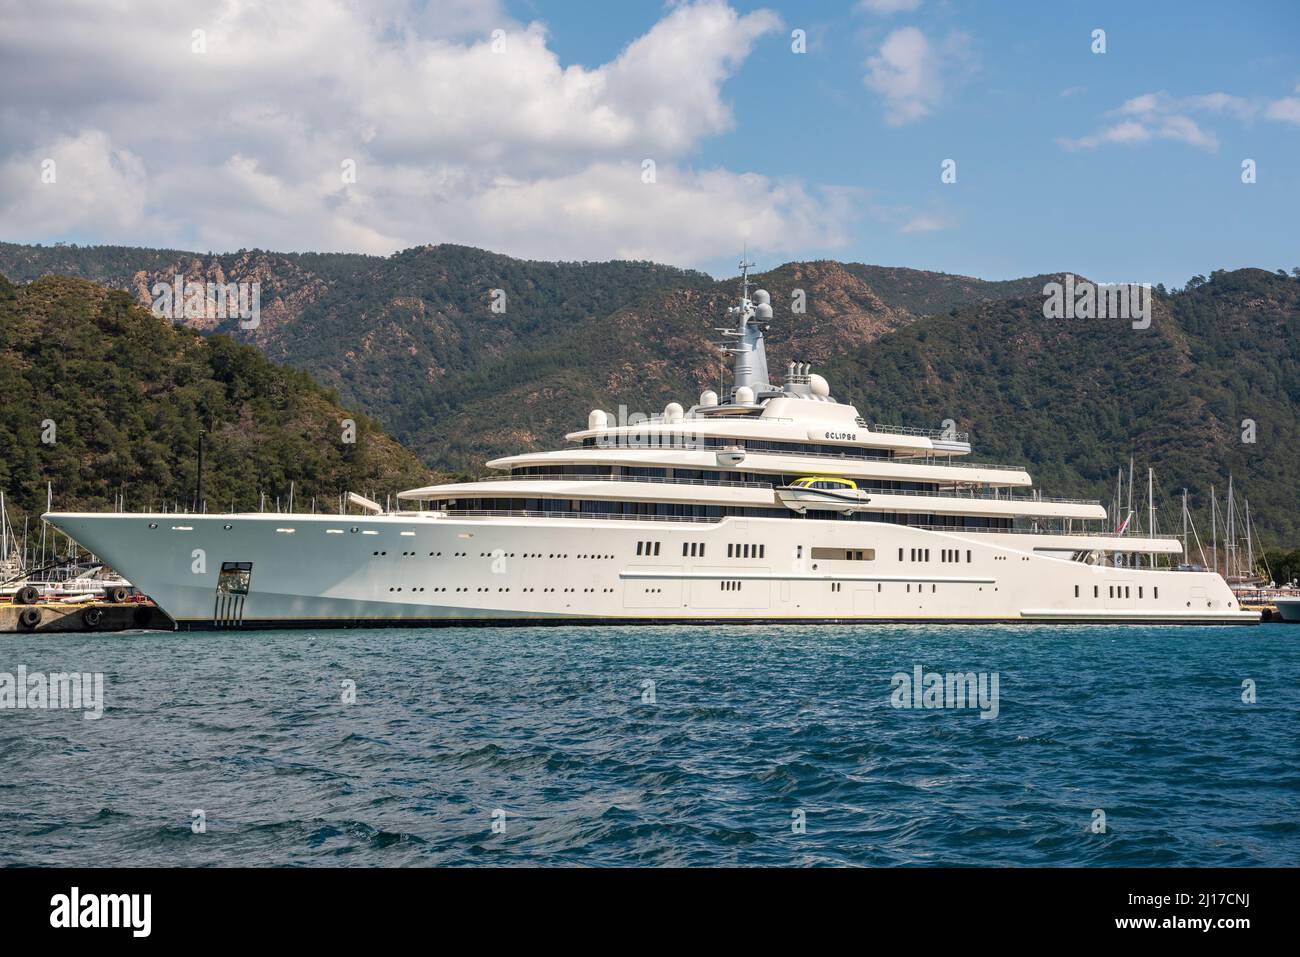 Marmaris, Turkey – March 23, 2022. M/Y Eclipse superyacht owned by  Russian oligarch Roman Abramovich, in Netsel Marina port of Marmaris, Turkey. Built by Blohm+Voss of Hamburg, Germany and delivered to Abramovich on 9 December 2010, the yacht is the fourth longest afloat. The yacht's cost has been estimated at €340 million. Eclipse has two helicopter pads, 24 guest cabins, two swimming pools, several hot tubs, and a disco hall. It is also equipped with three launch boats and a mini-submarine that is capable of submerging to 50 metres (160 ft). Stock Photo